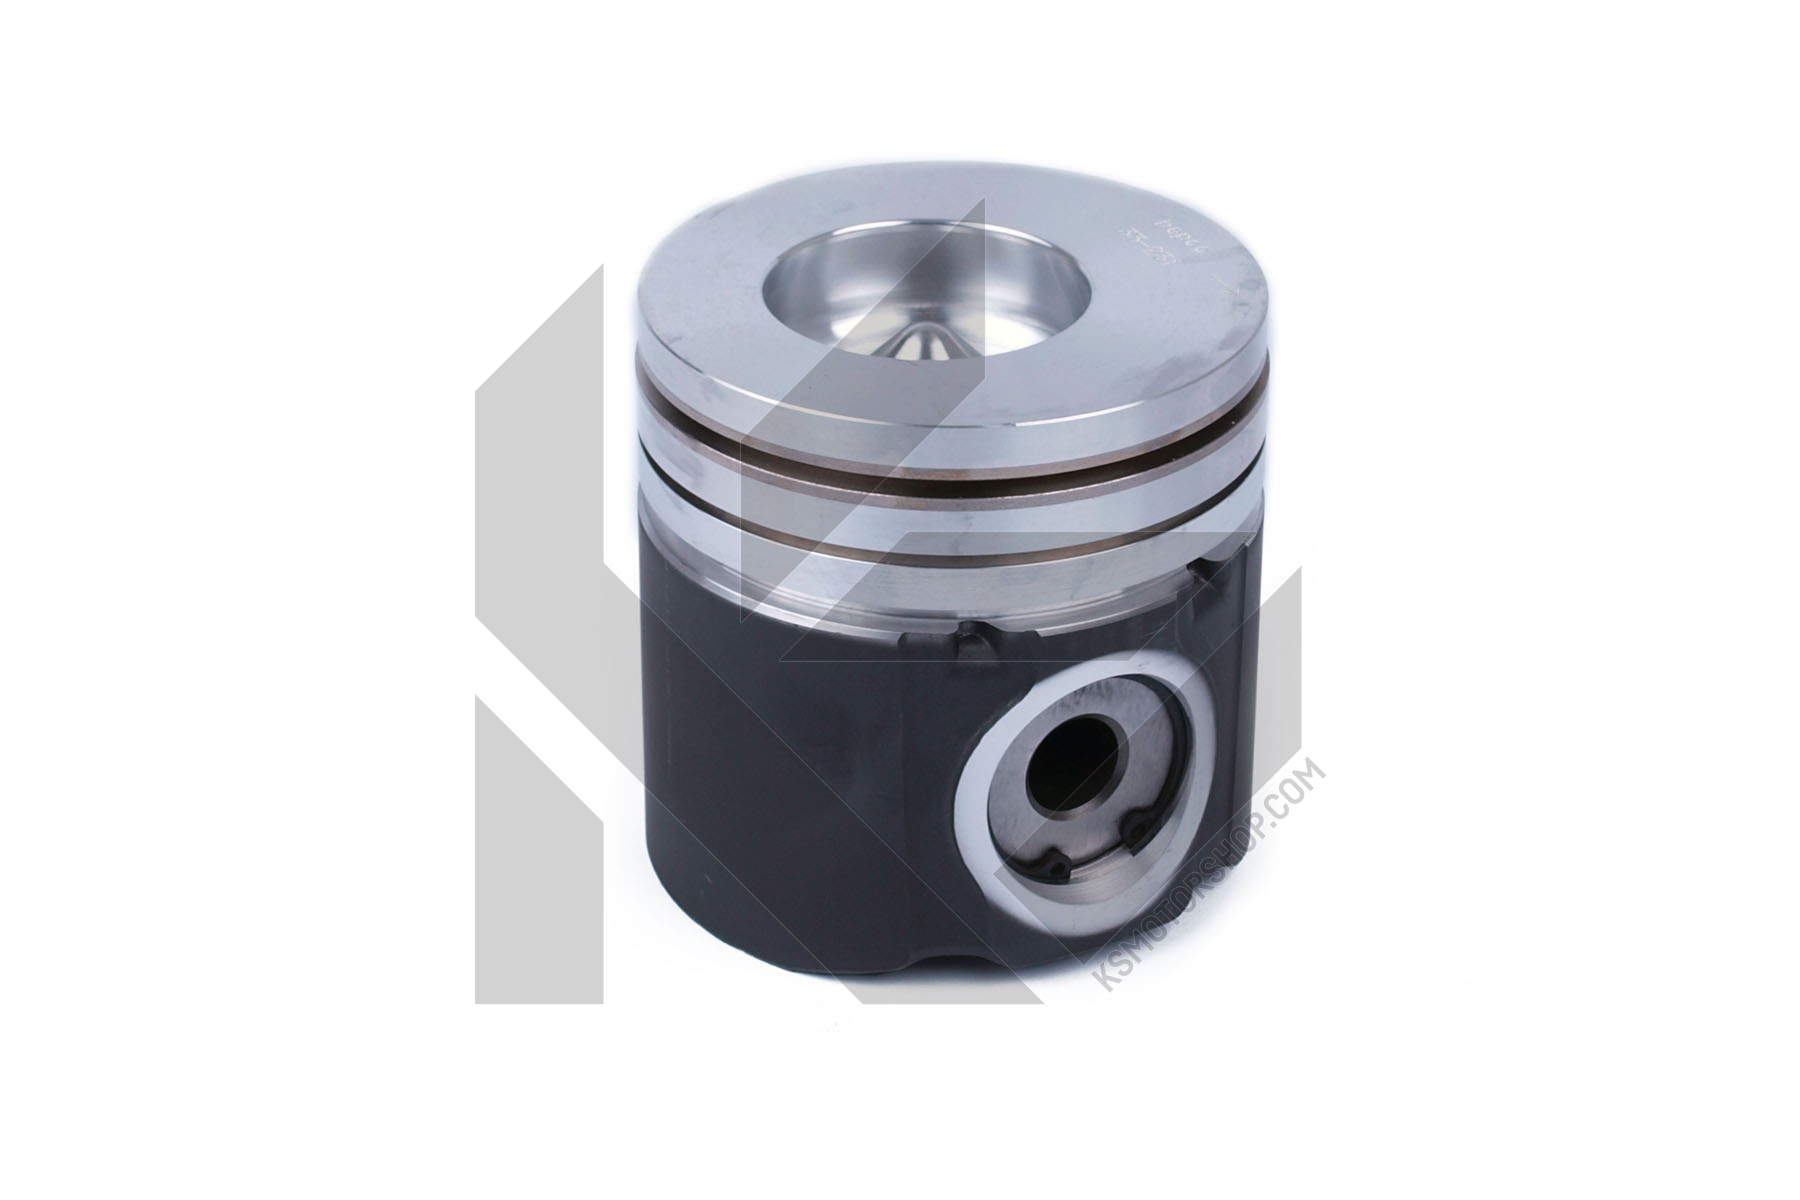 87802364, Complete piston with rings and pin, NON OE, New Holland  1089 1095 2550 555E 5610S 5640 575E 655E 6610S 6440 6440O 675E 6810S 7010 7010S 7740 7740O 8160 8260 8360 8560 9030E 9030V FG65C HW300 HW320 HW340 LB110 LB115 LB115B LB75 TB100 TB110 TB120 TM115 TM125 TM135 TM150 TM165 TS100 TS110 TS90, 25715N0, 257PI00100000, 38007275, 82841446, 87800435, 87800444, 87801050, 87801051, 87801100, 87801741, 87802336, 87802358, 87802364, 87802456, 87802834, 87802976, 87803279, 87840047, 87841229, 87891063, F0NN6110CC, F0NN6110CD